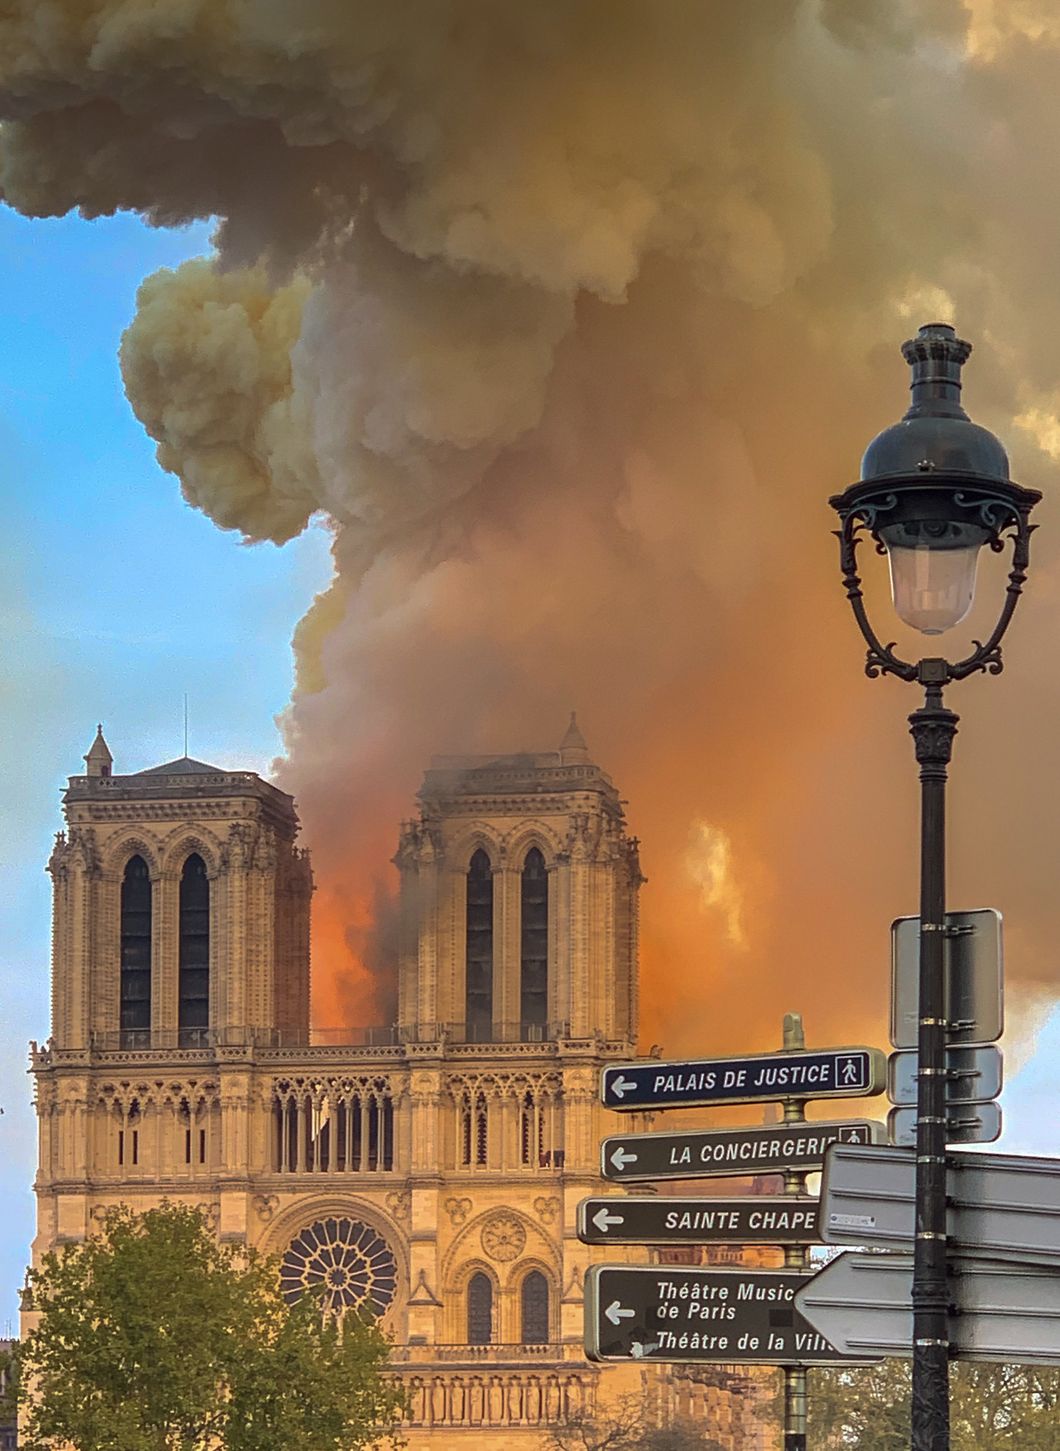 What The Notre Dame Fire Says About Society